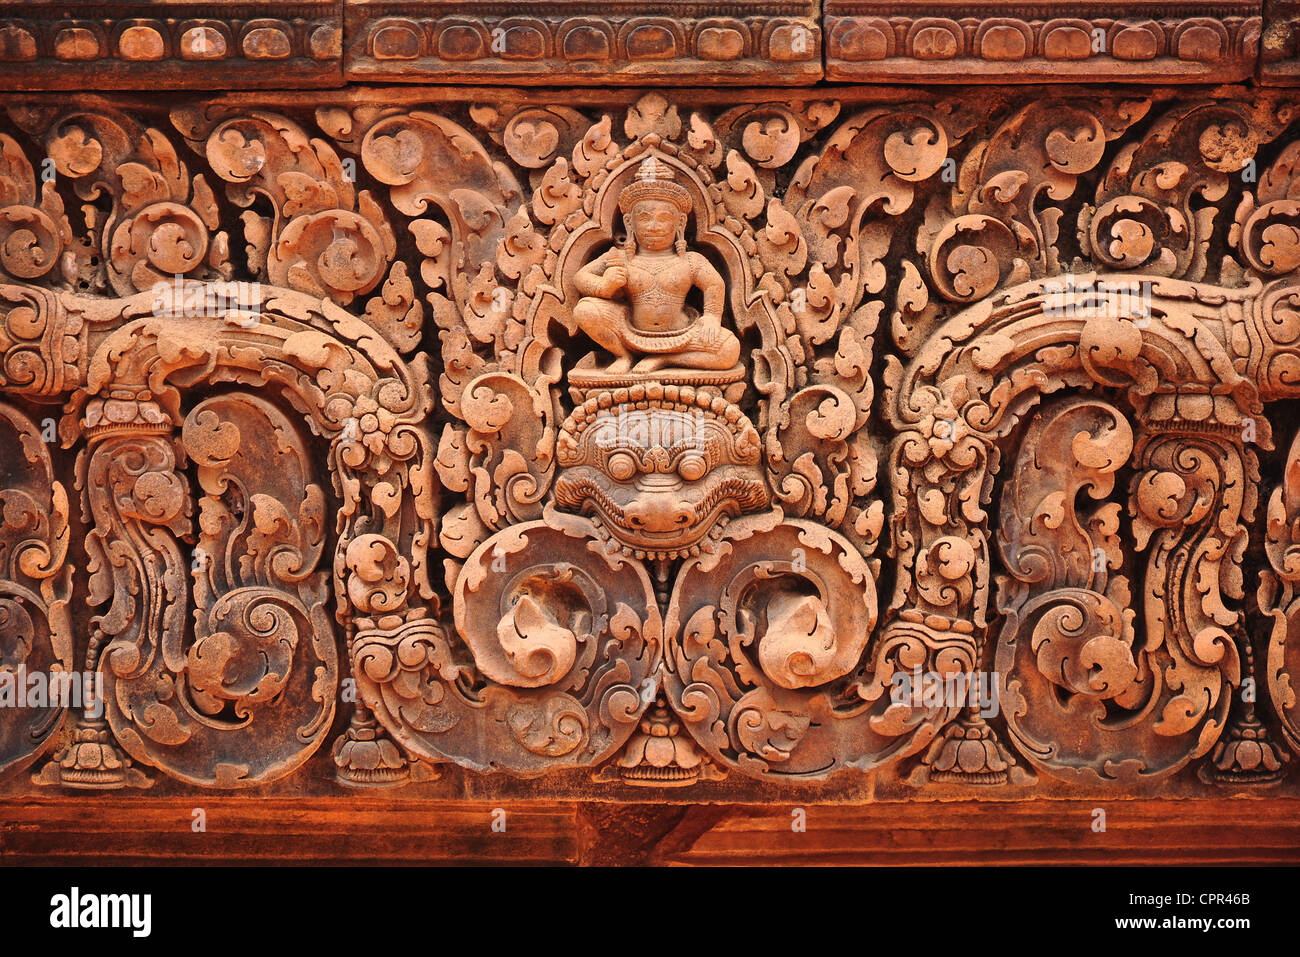 Ornate sandstone carvings on a lintel of the Banteay Srey temple complex in Siem Reap, Cambodia. This carving features a kala. Stock Photo